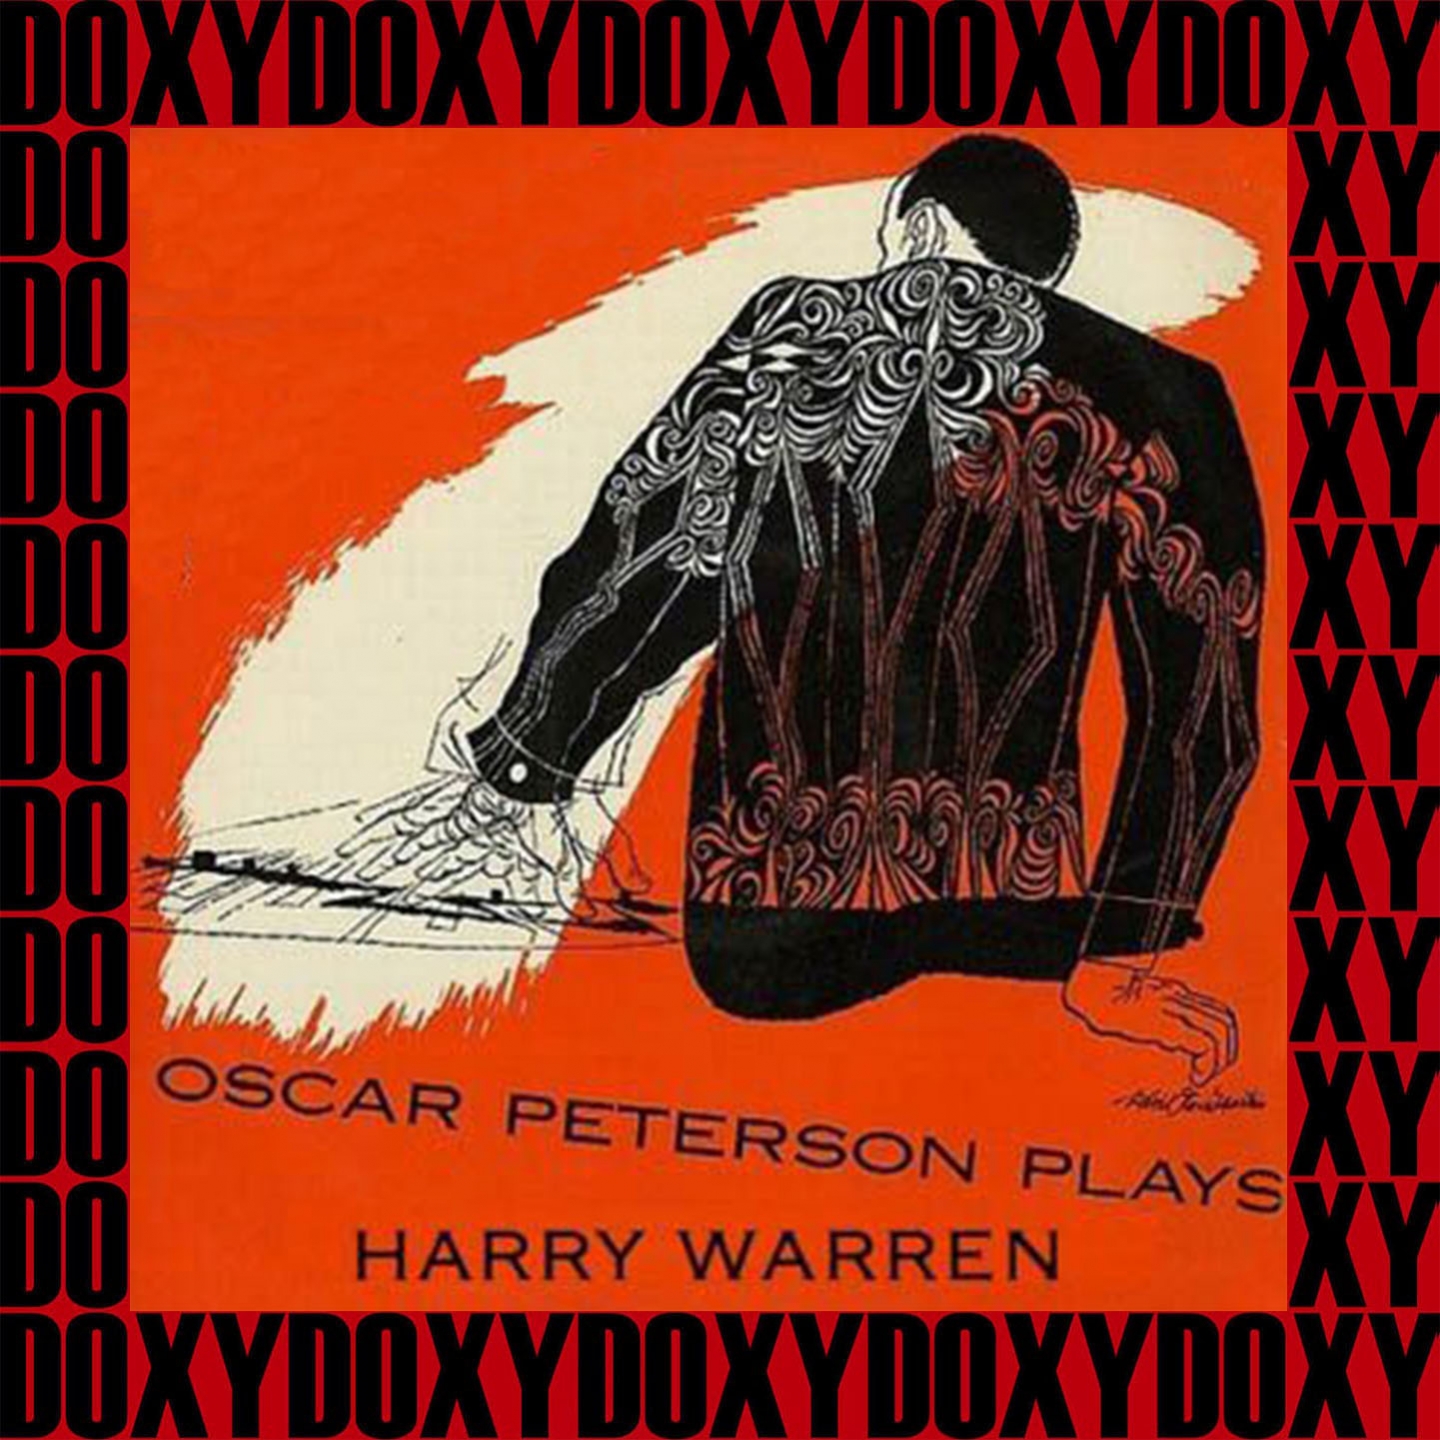 Oscar Peterson Plays Harry Warren (Remastered Version) (Doxy Collection)